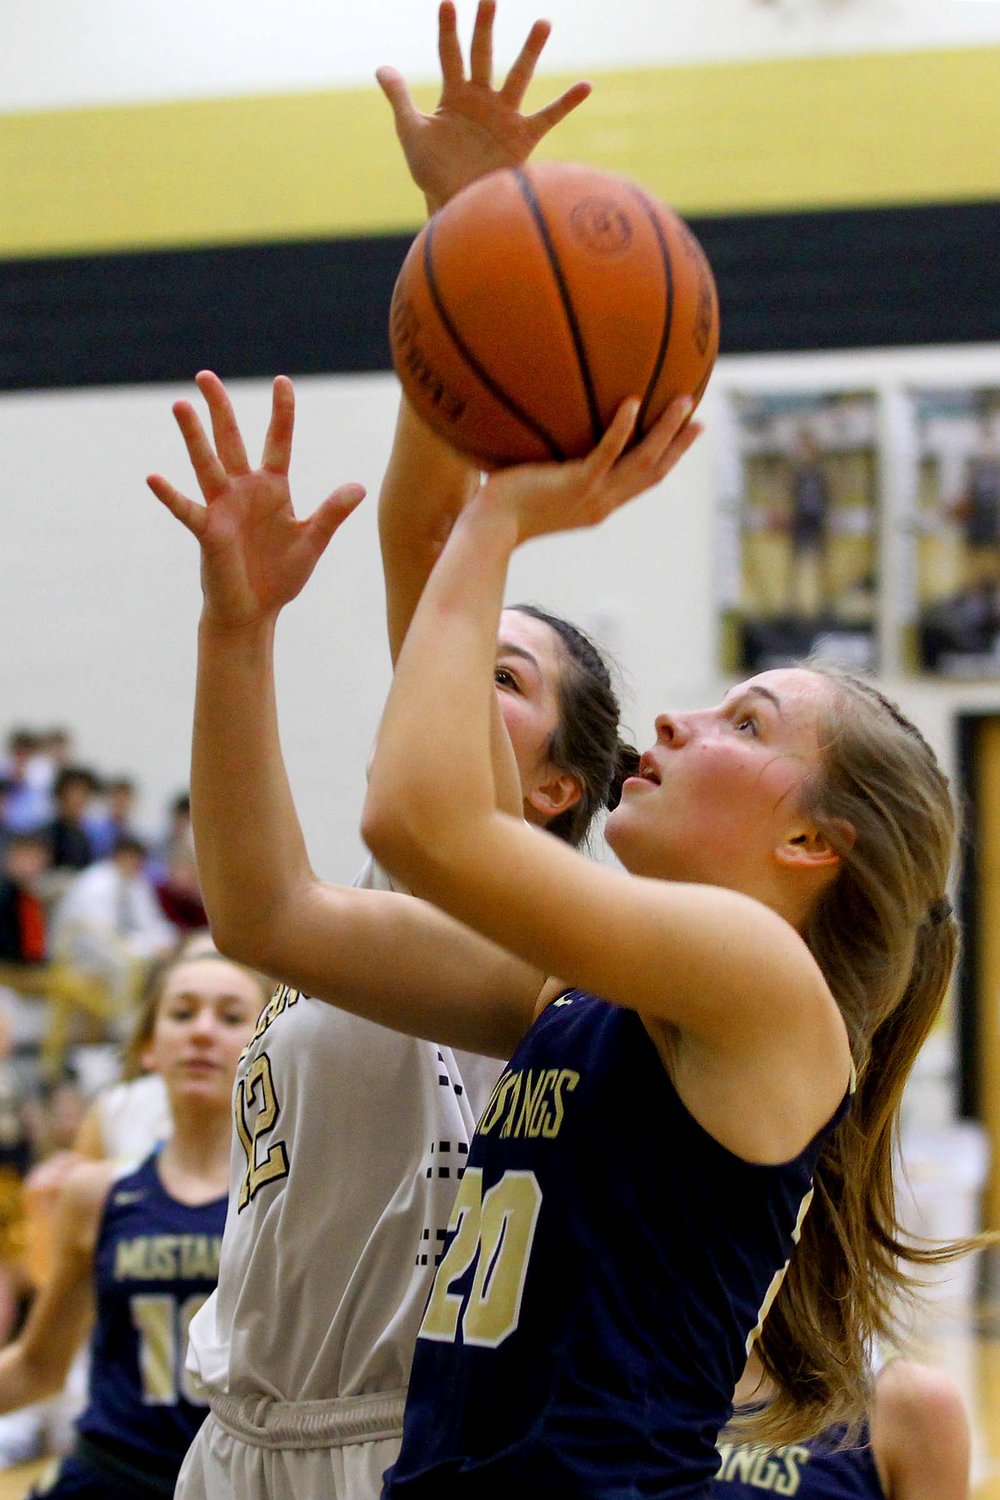 Hannah Prickett of Fountain Central going up for a lay-up as Briley Peyton of Covington closes in.